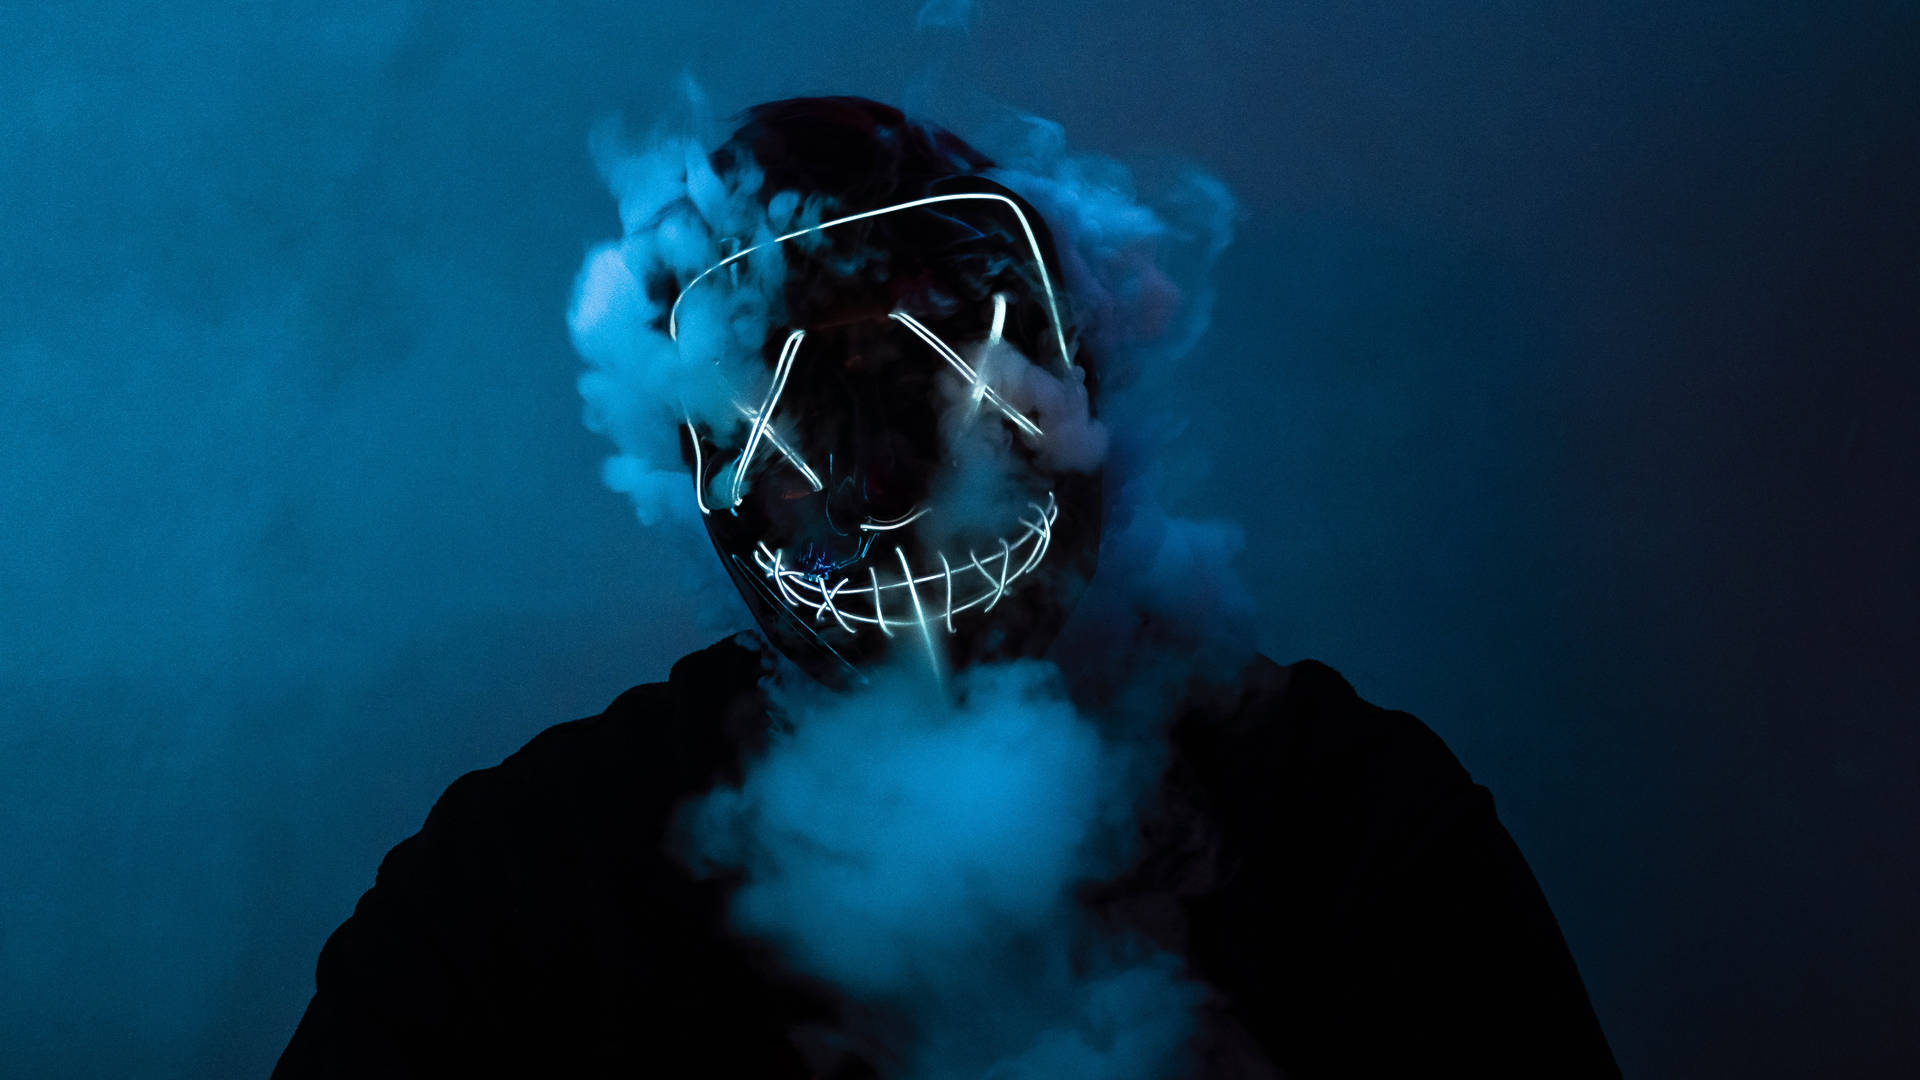 Unleash the Night with the Smoking Purge Mask Wallpaper